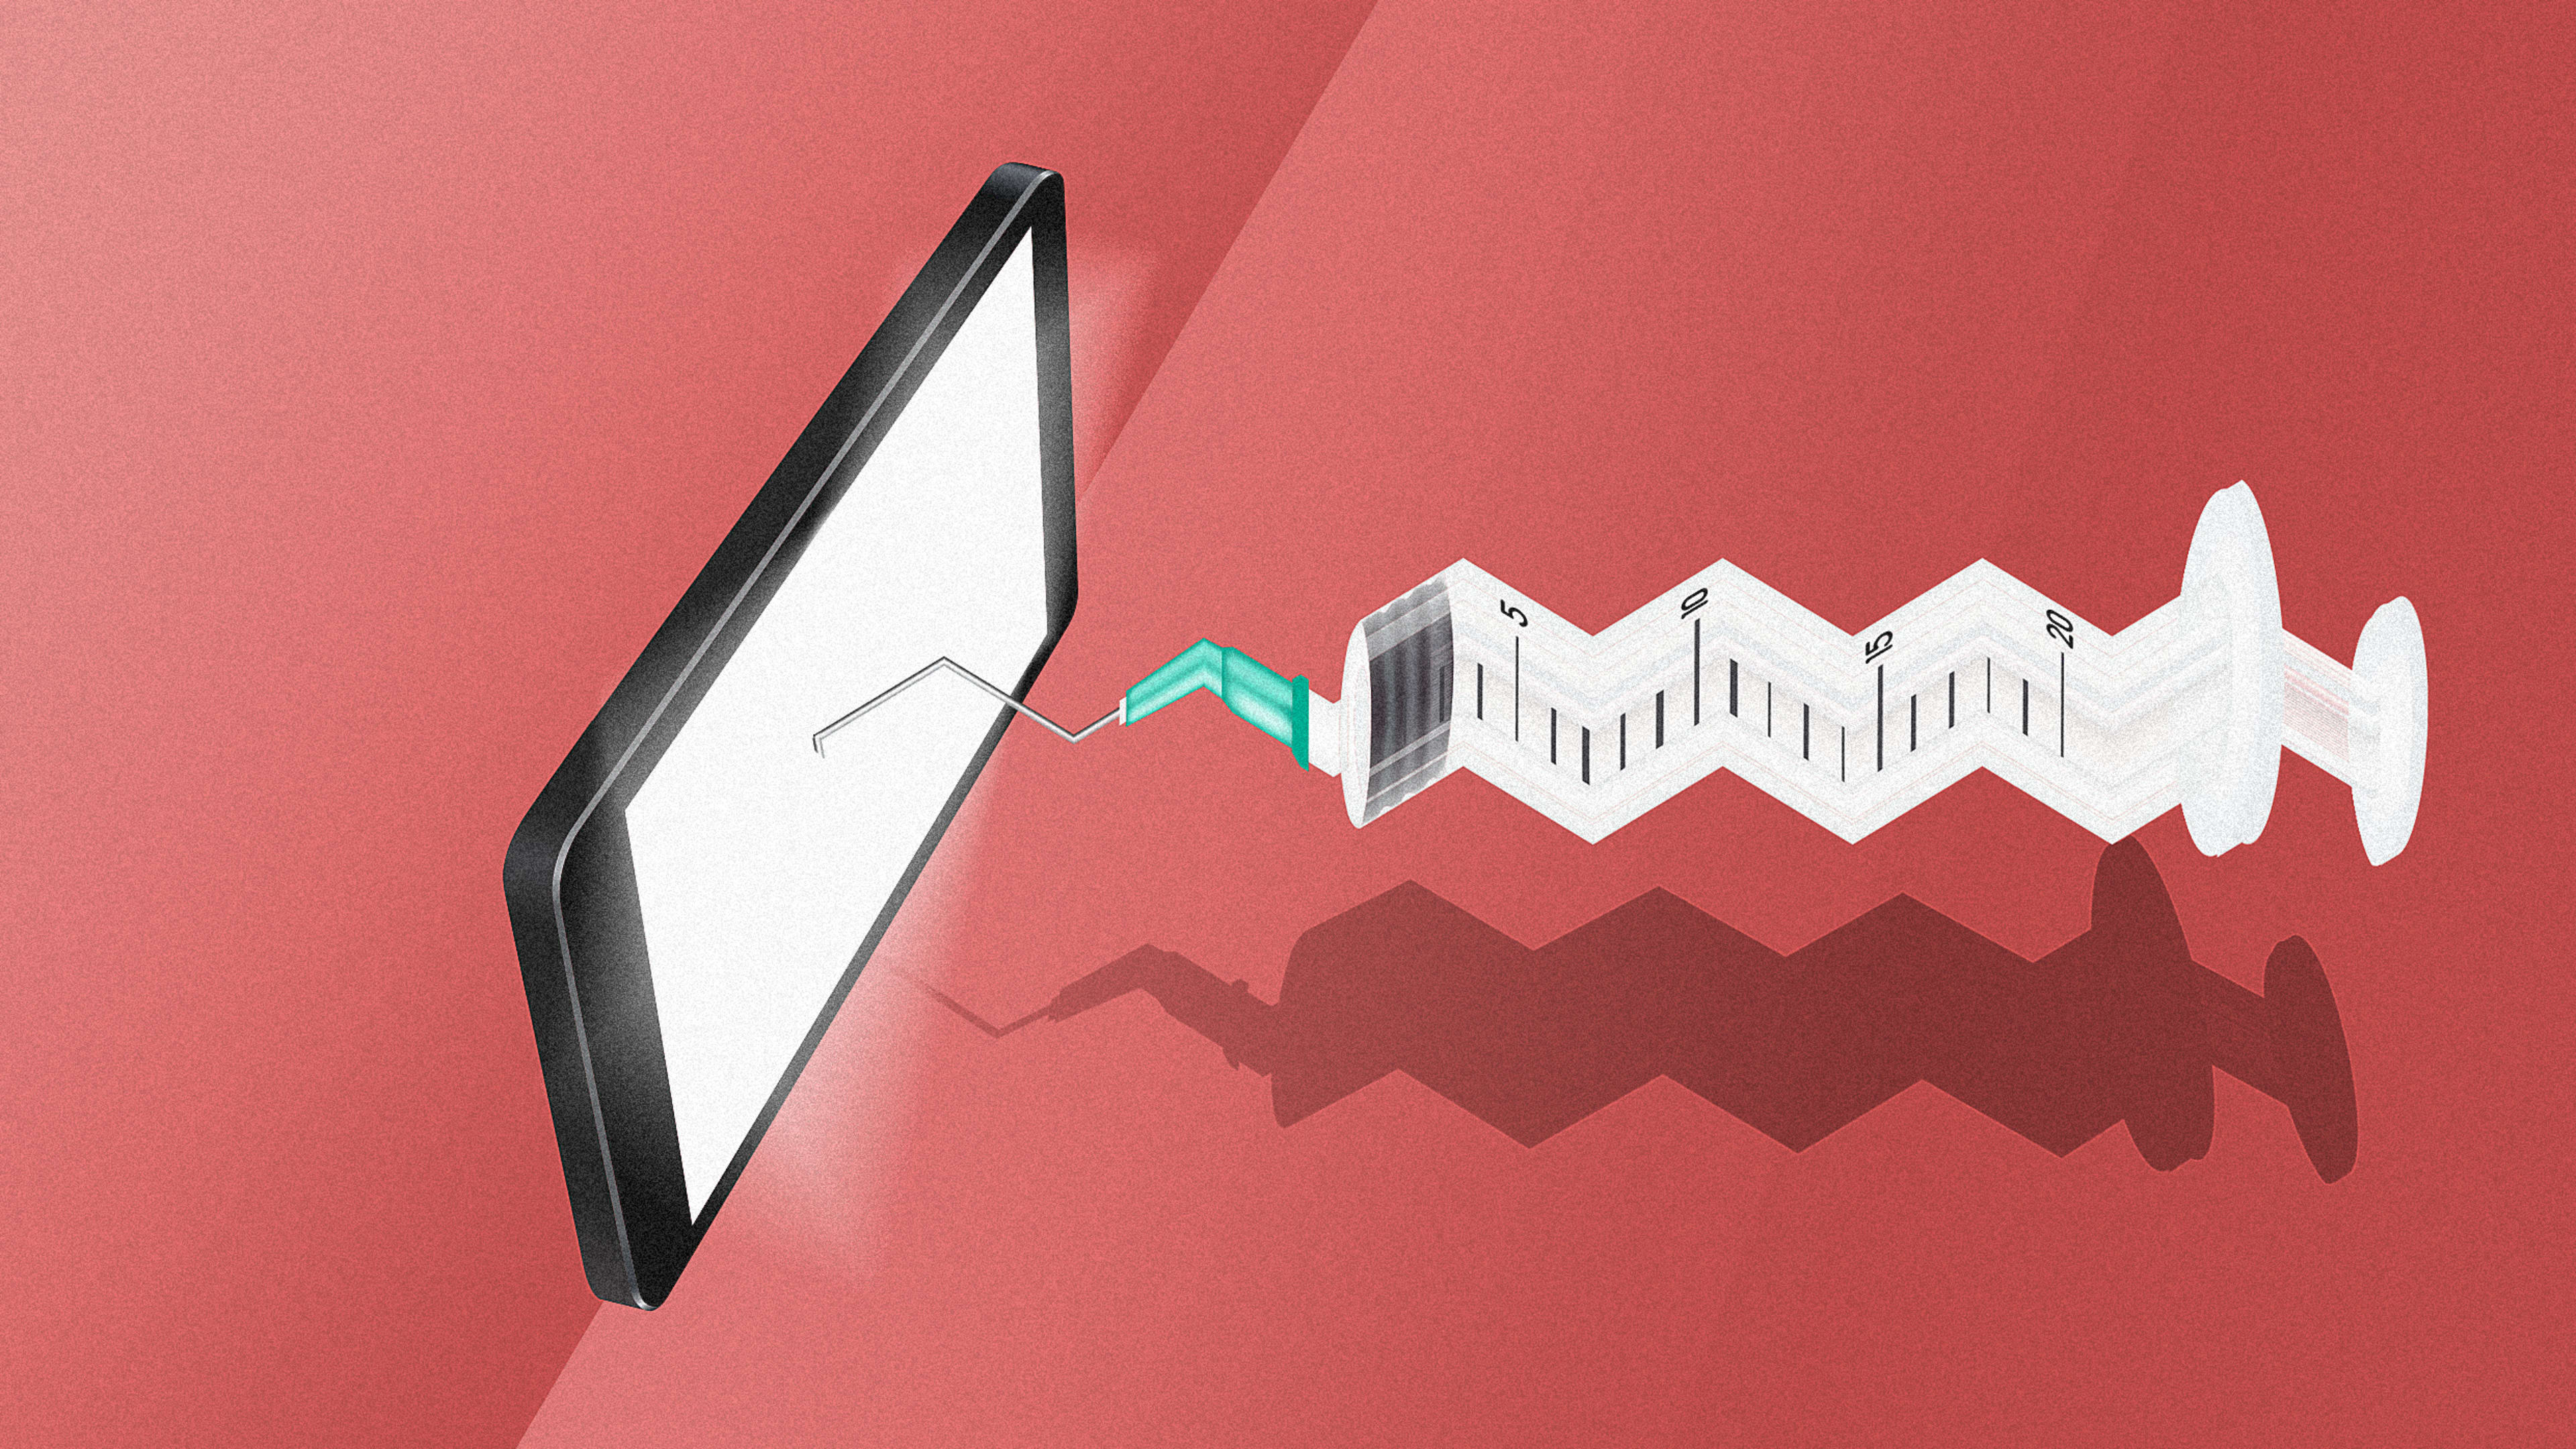 An illustration of a syringe being stopped by a phone screen